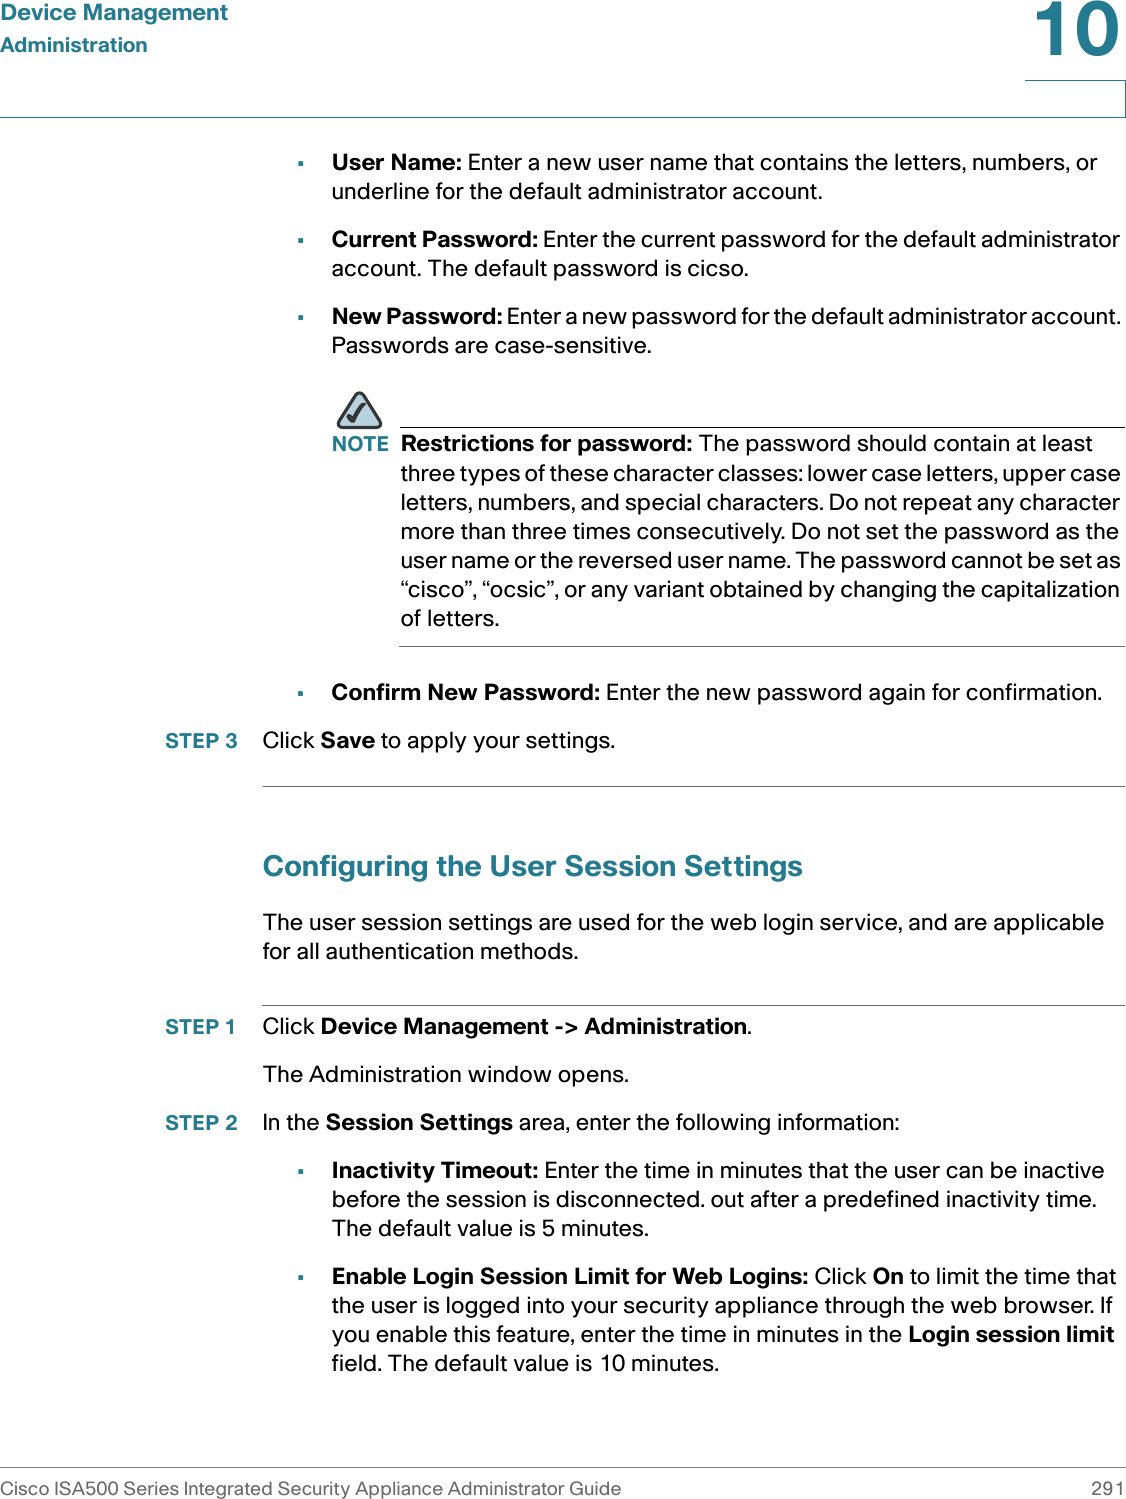 Device ManagementAdministrationCisco ISA500 Series Integrated Security Appliance Administrator Guide 29110 •User Name: Enter a new user name that contains the letters, numbers, or underline for the default administrator account. •Current Password: Enter the current password for the default administrator account. The default password is cicso. •New Password: Enter a new password for the default administrator account. Passwords are case-sensitive. NOTE Restrictions for password: The password should contain at least three types of these character classes: lower case letters, upper case letters, numbers, and special characters. Do not repeat any character more than three times consecutively. Do not set the password as the user name or the reversed user name. The password cannot be set as “cisco”, “ocsic”, or any variant obtained by changing the capitalization of letters. •Confirm New Password: Enter the new password again for confirmation.STEP 3 Click Save to apply your settings. Configuring the User Session SettingsThe user session settings are used for the web login service, and are applicable for all authentication methods. STEP 1 Click Device Management -&gt; Administration.The Administration window opens.STEP 2 In the Session Settings area, enter the following information: •Inactivity Timeout: Enter the time in minutes that the user can be inactive before the session is disconnected. out after a predefined inactivity time. The default value is 5 minutes. •Enable Login Session Limit for Web Logins: Click On to limit the time that the user is logged into your security appliance through the web browser. If you enable this feature, enter the time in minutes in the Login session limit field. The default value is 10 minutes. 